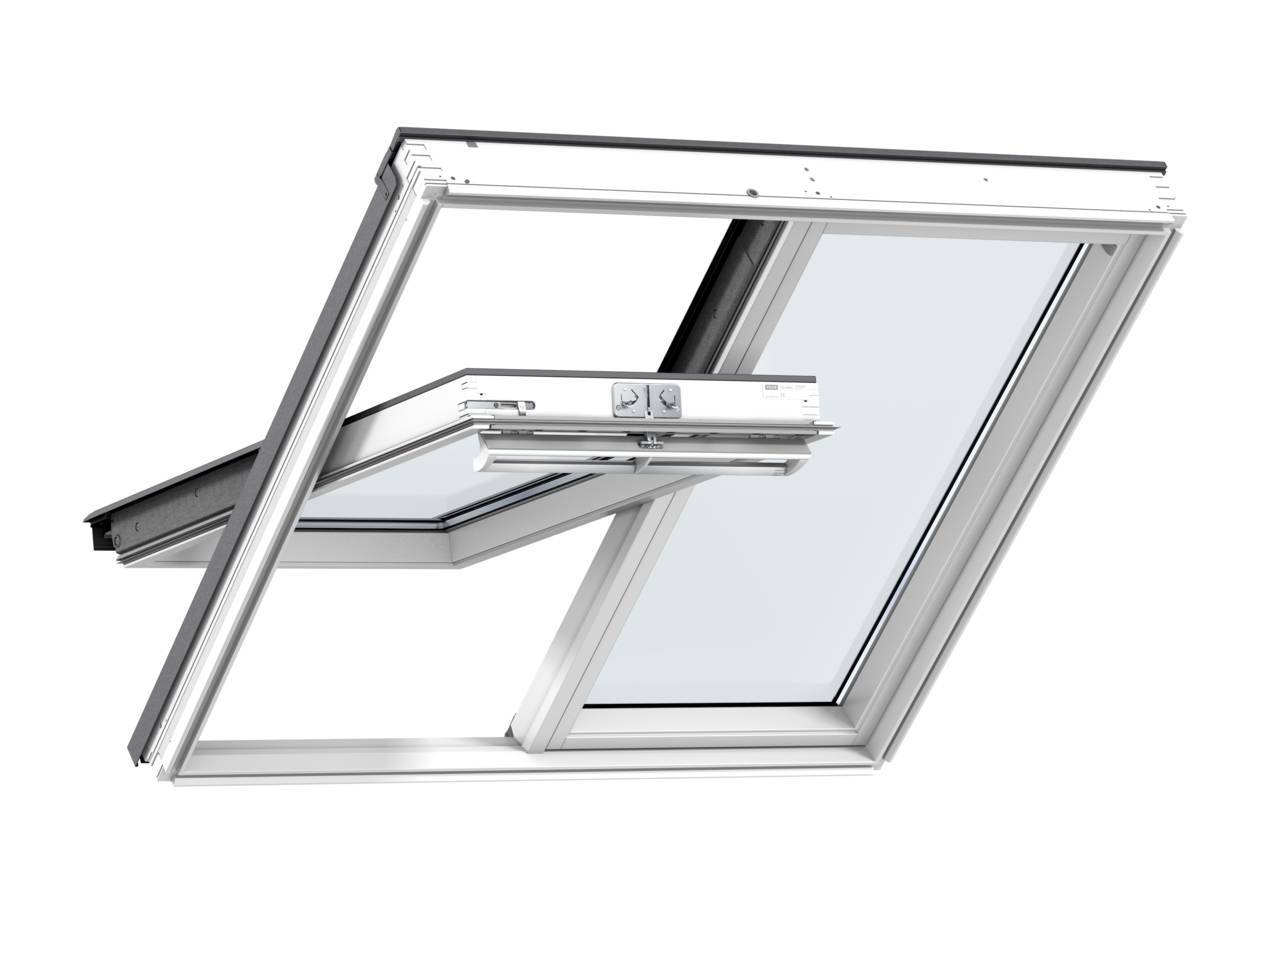 GGLS 2in1 Centre-Pivot Timber Roof Window.